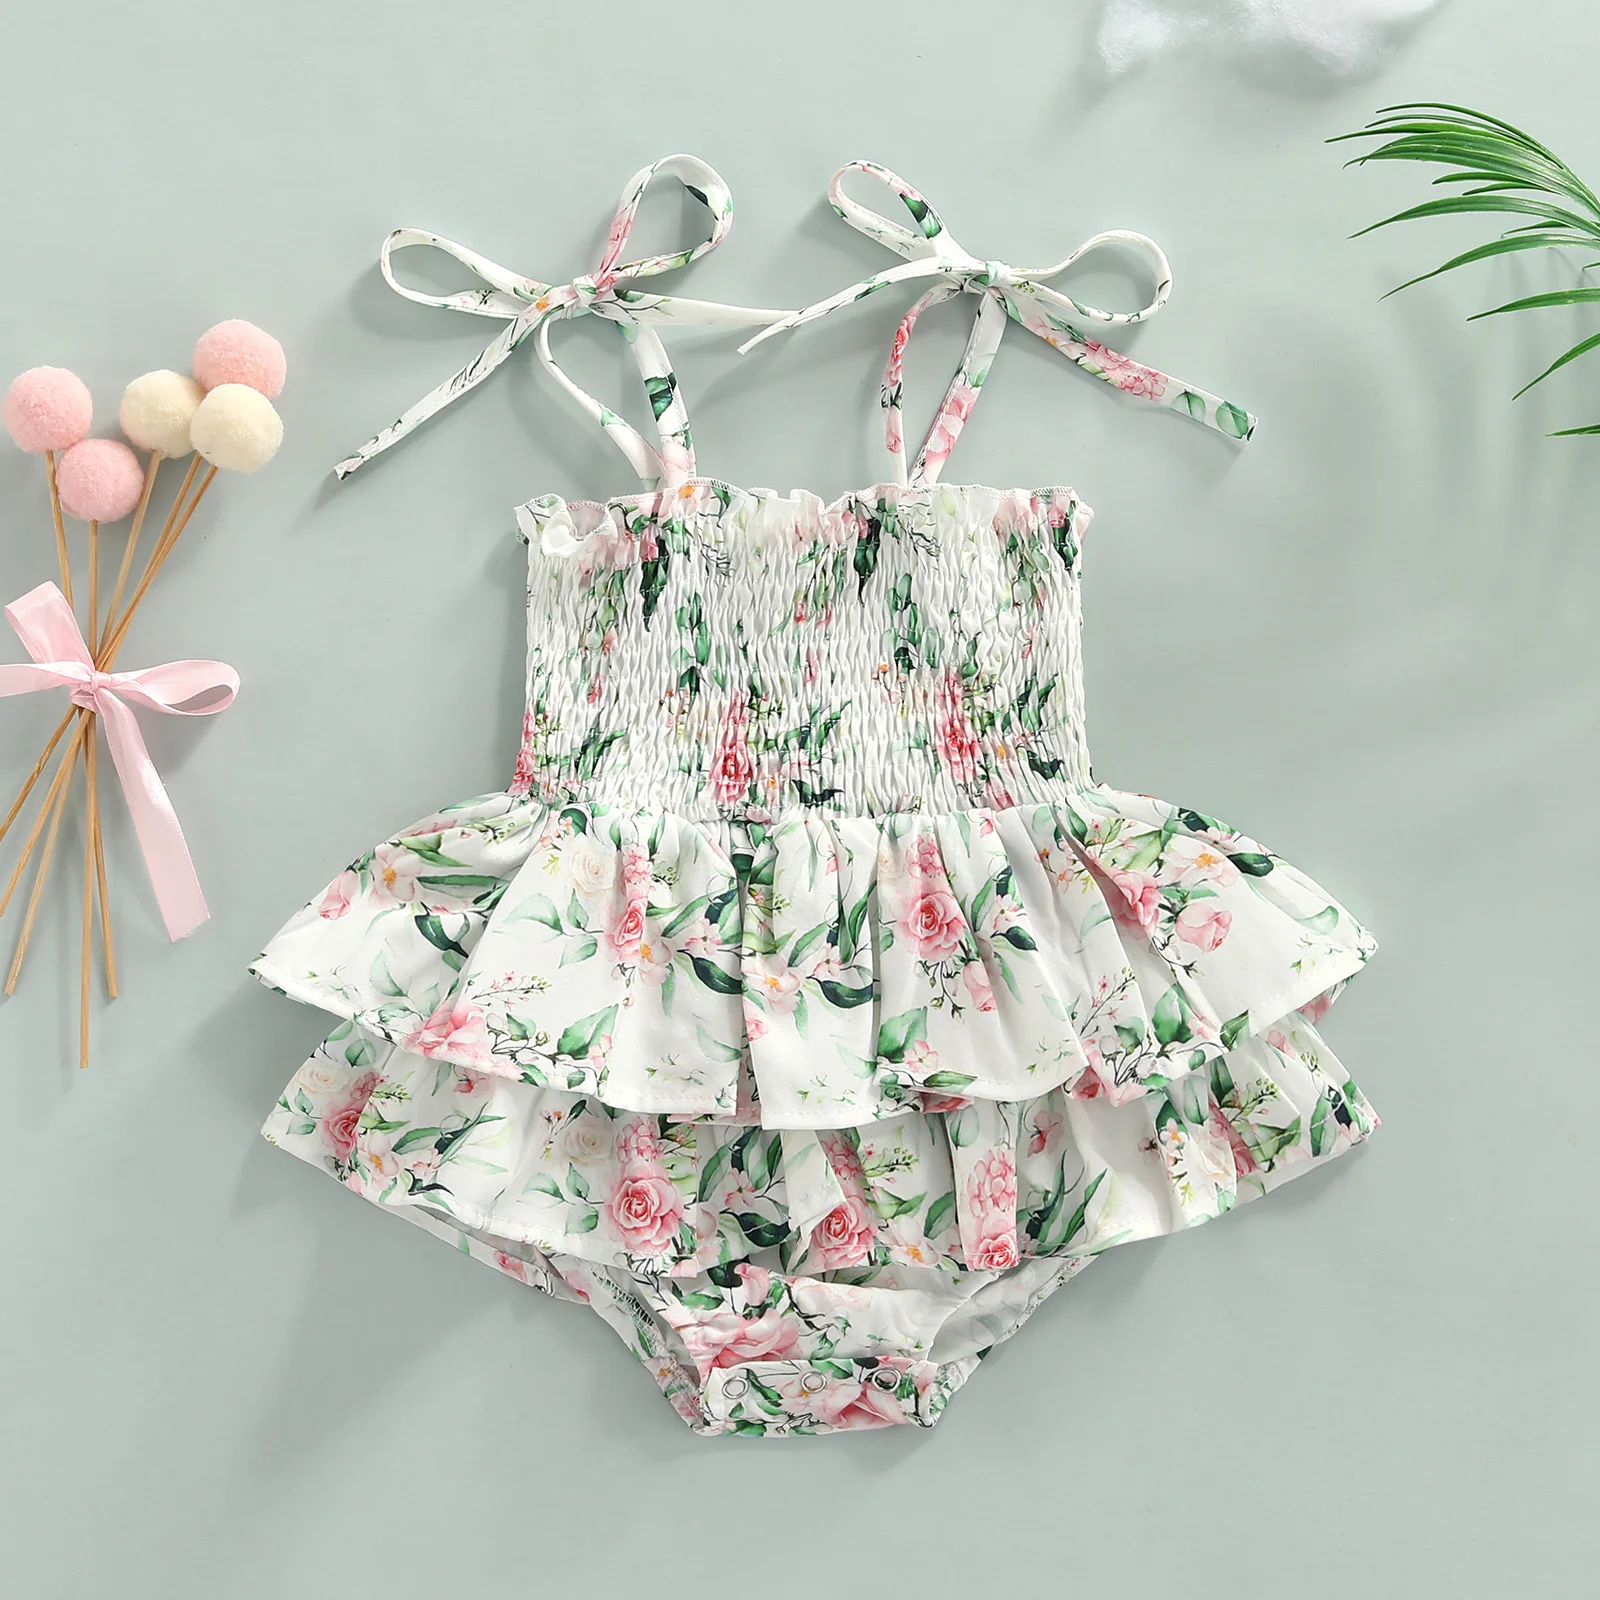 ma&baby 0-18M Newborn Infant Baby Girls Romper Floral Print Ruffle Jumpsuit Playsuit Summer Clothes Costuems D01 black baby bodysuits	